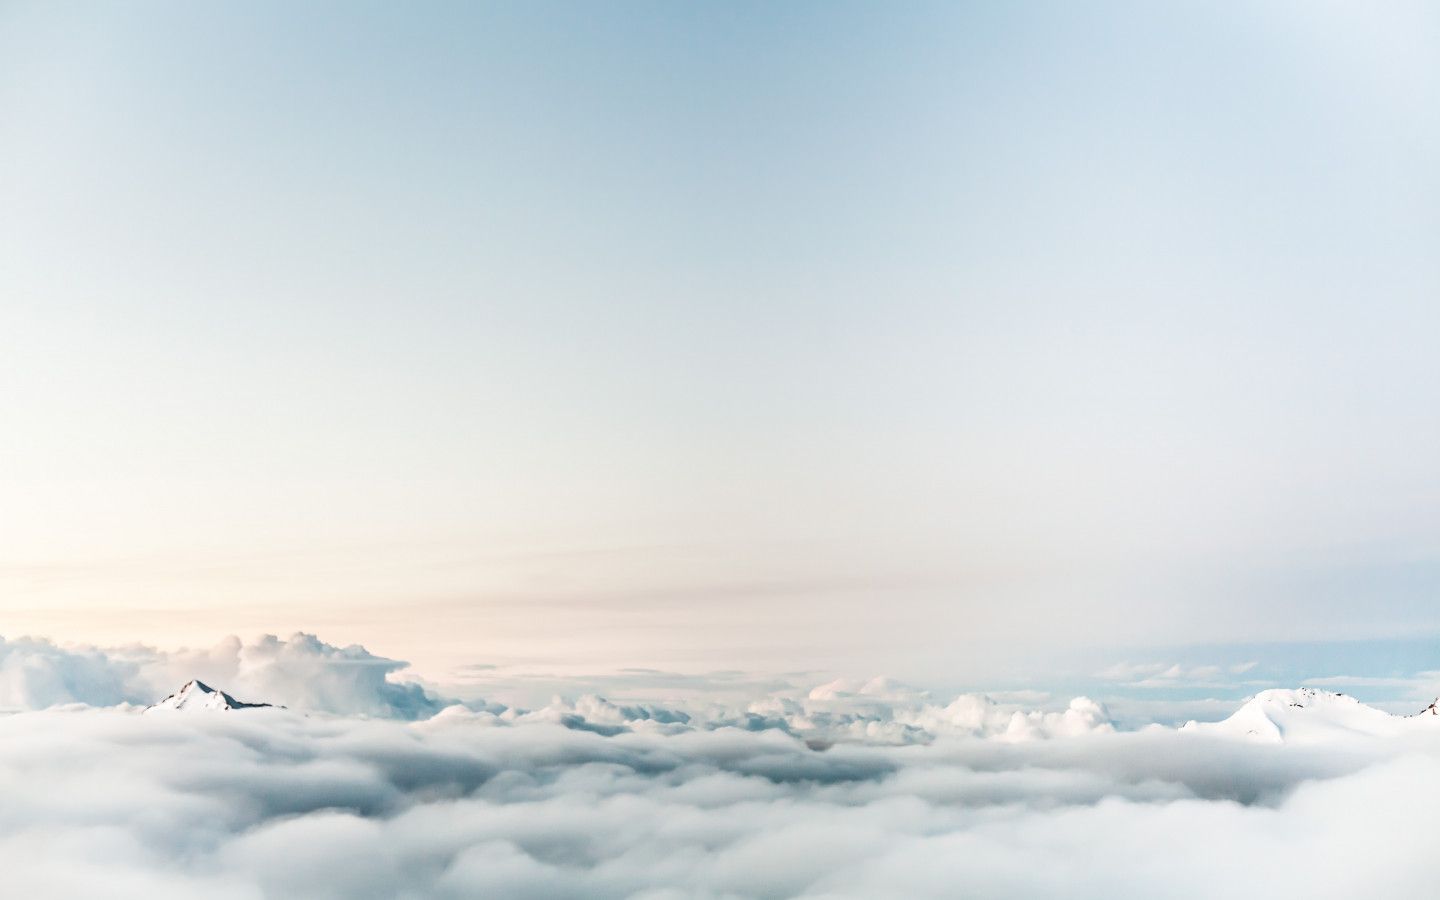 Download wallpaper: Floating on clouds 1440x900